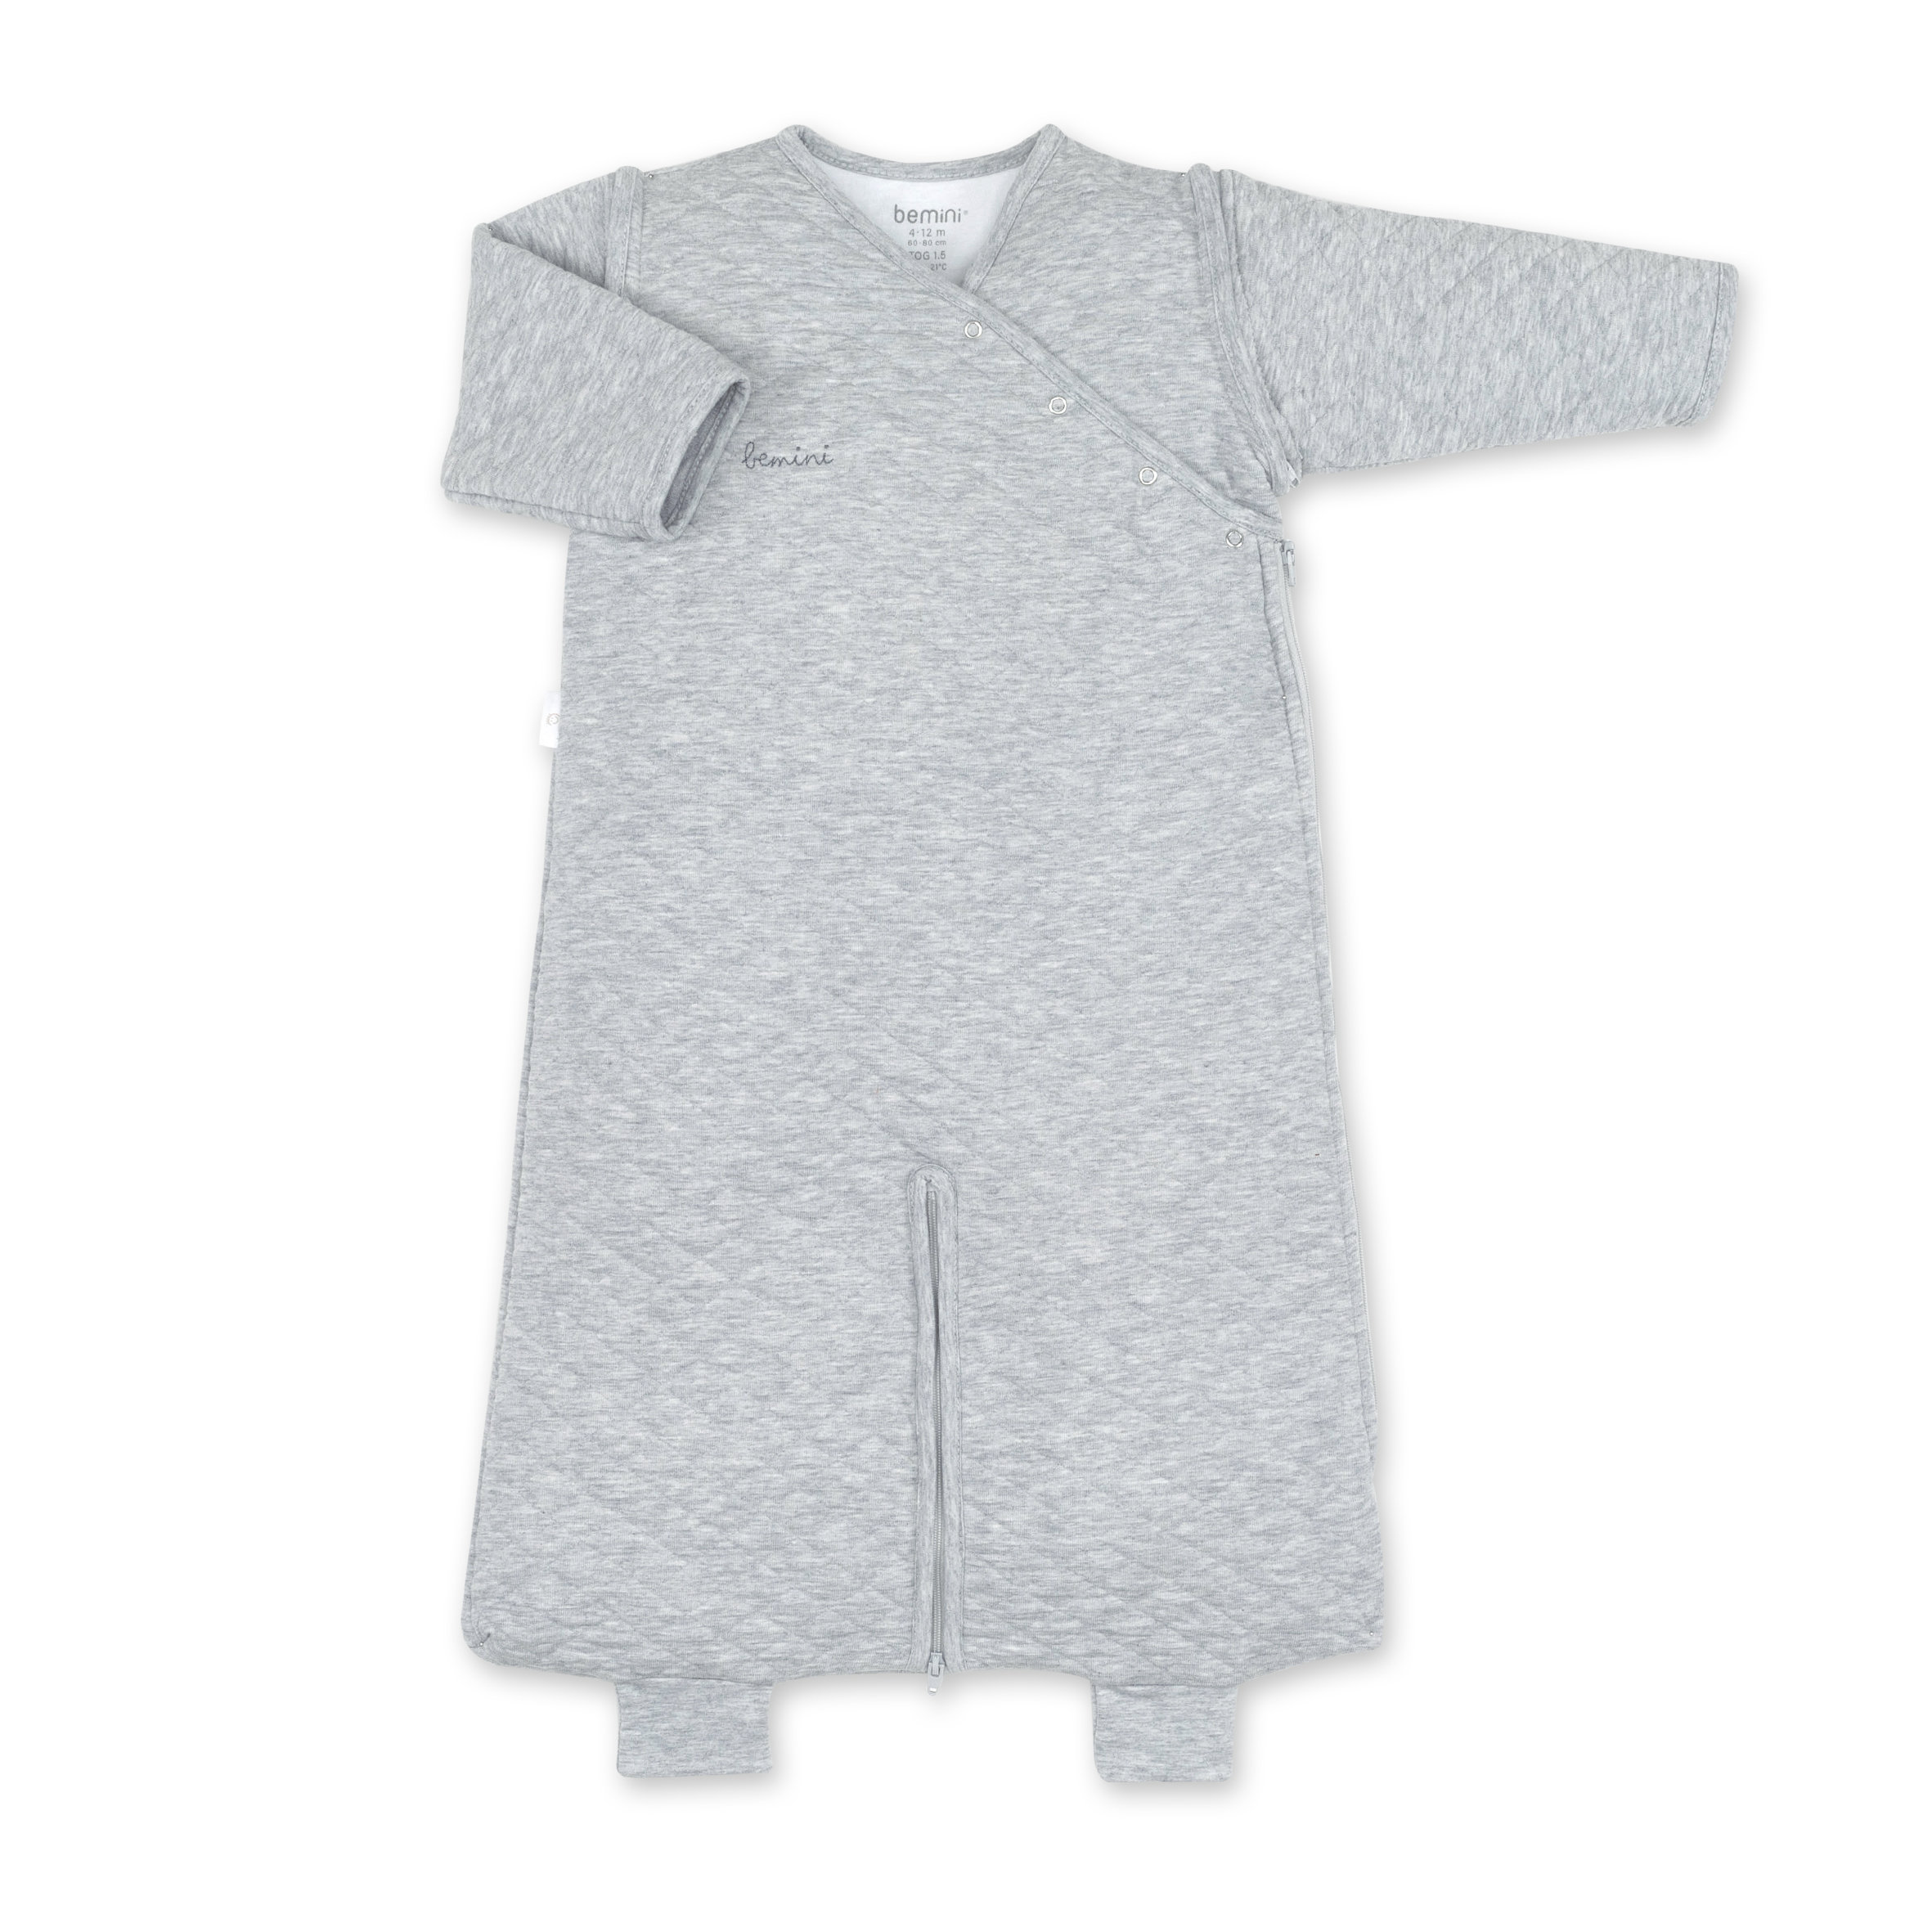 MAGIC BAG Quilted jersey 4-12m QUILT Mix grey tog 1.5